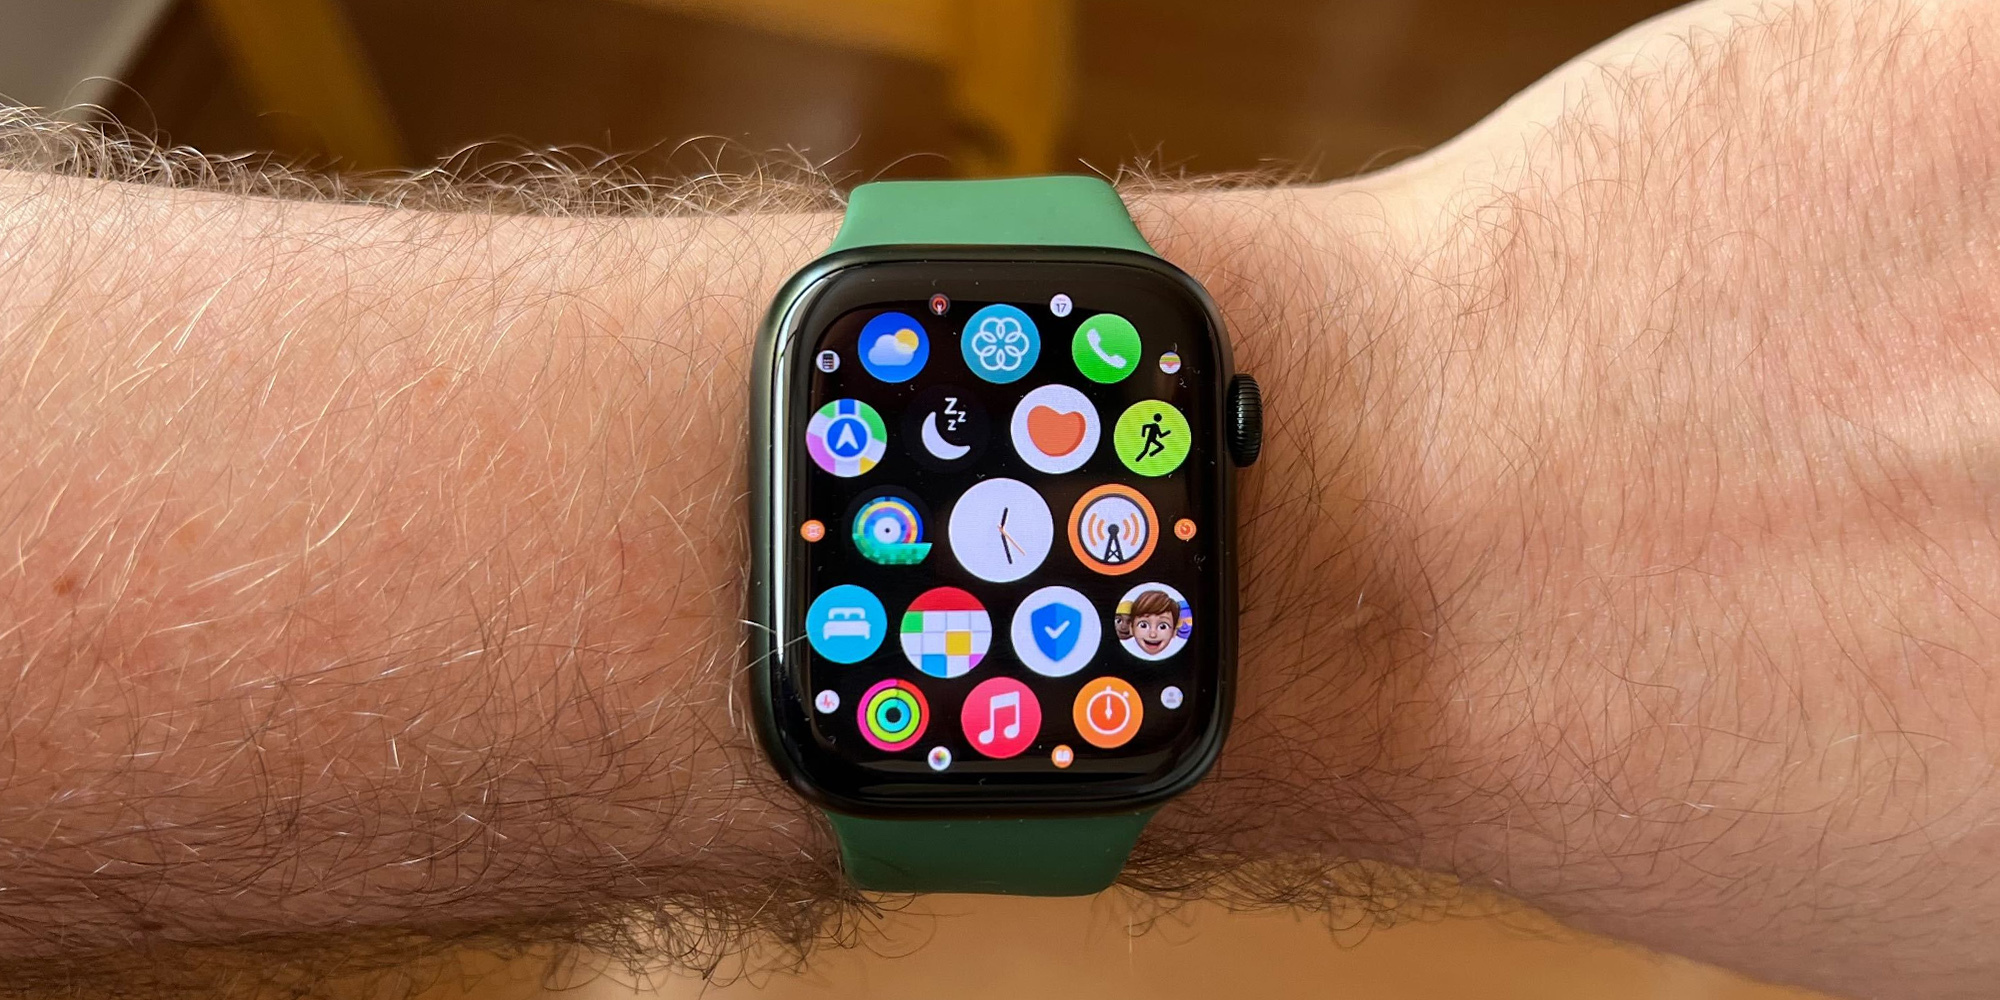 Delete apps from your Apple Watch - Apple Support (HK)